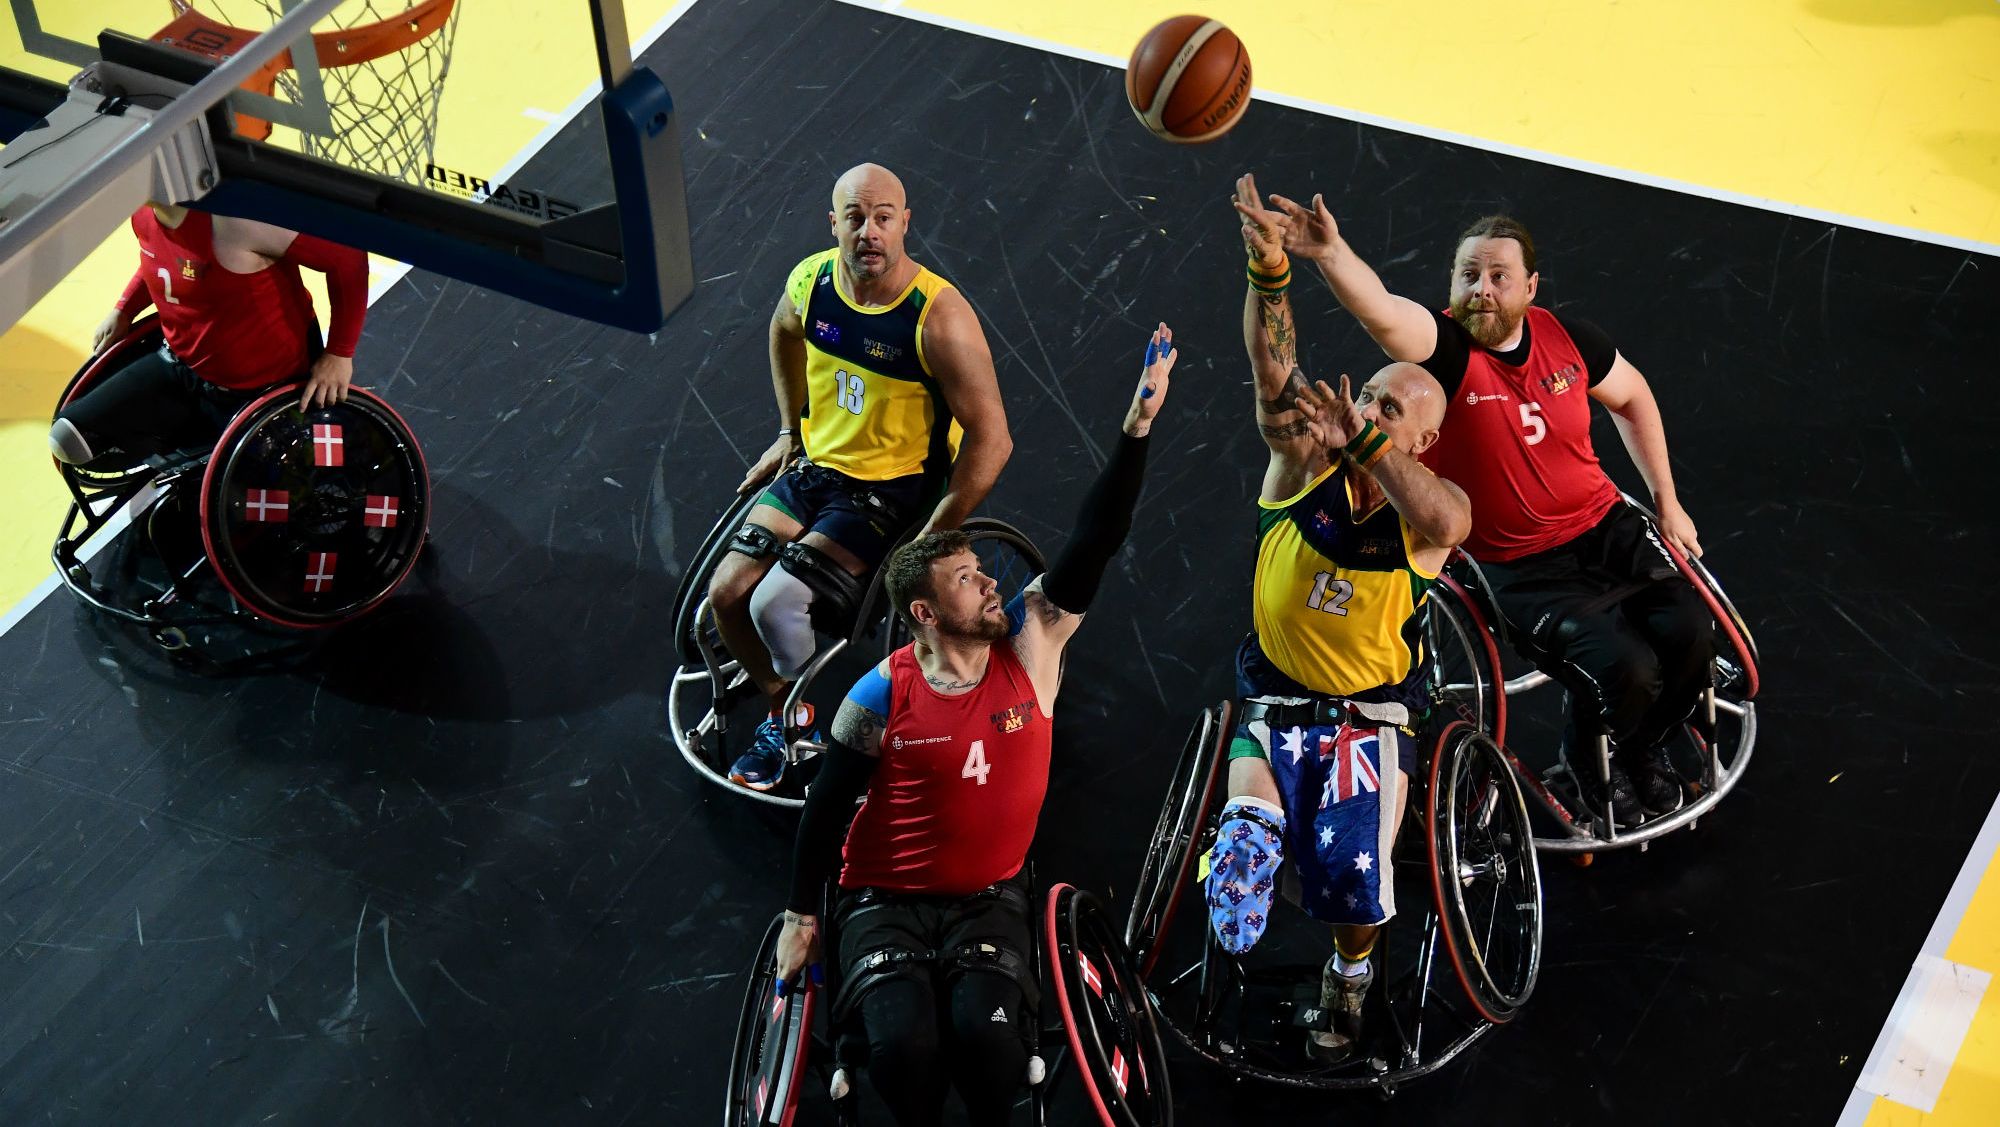 10 Things You Might Not Know About the Invictus Games Mental Floss